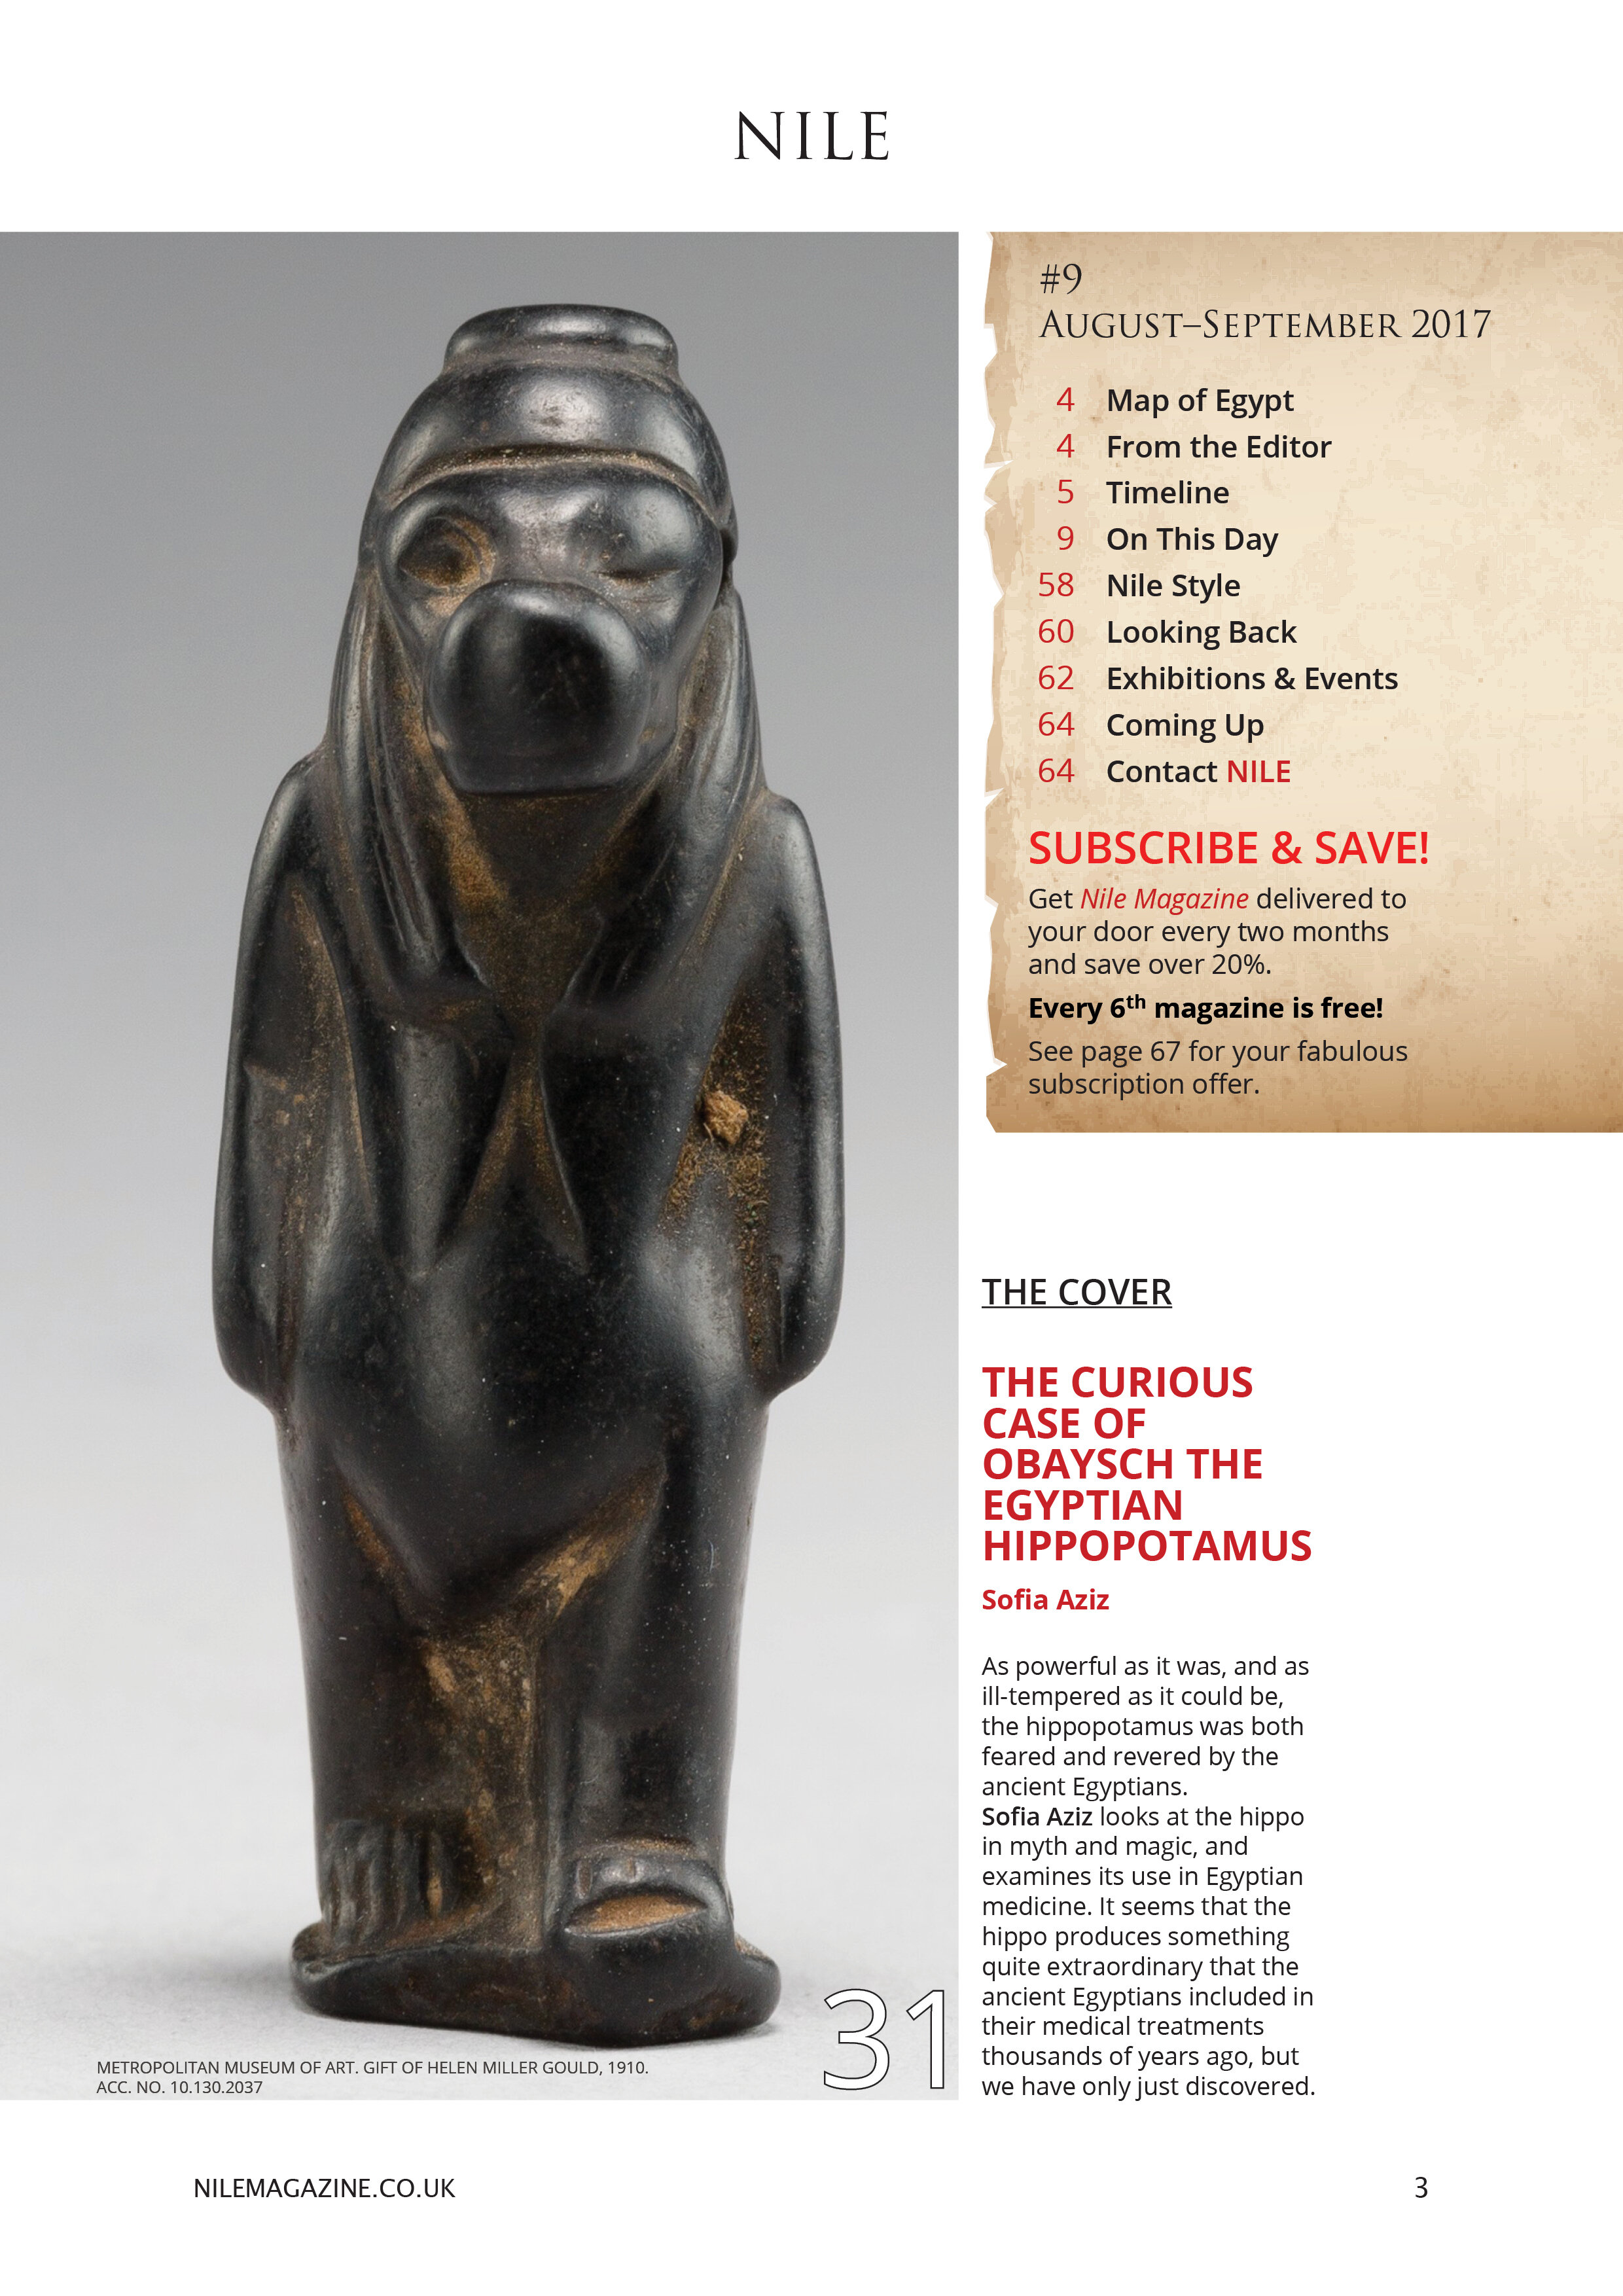 Nile 9, Contents 2 1A.jpg